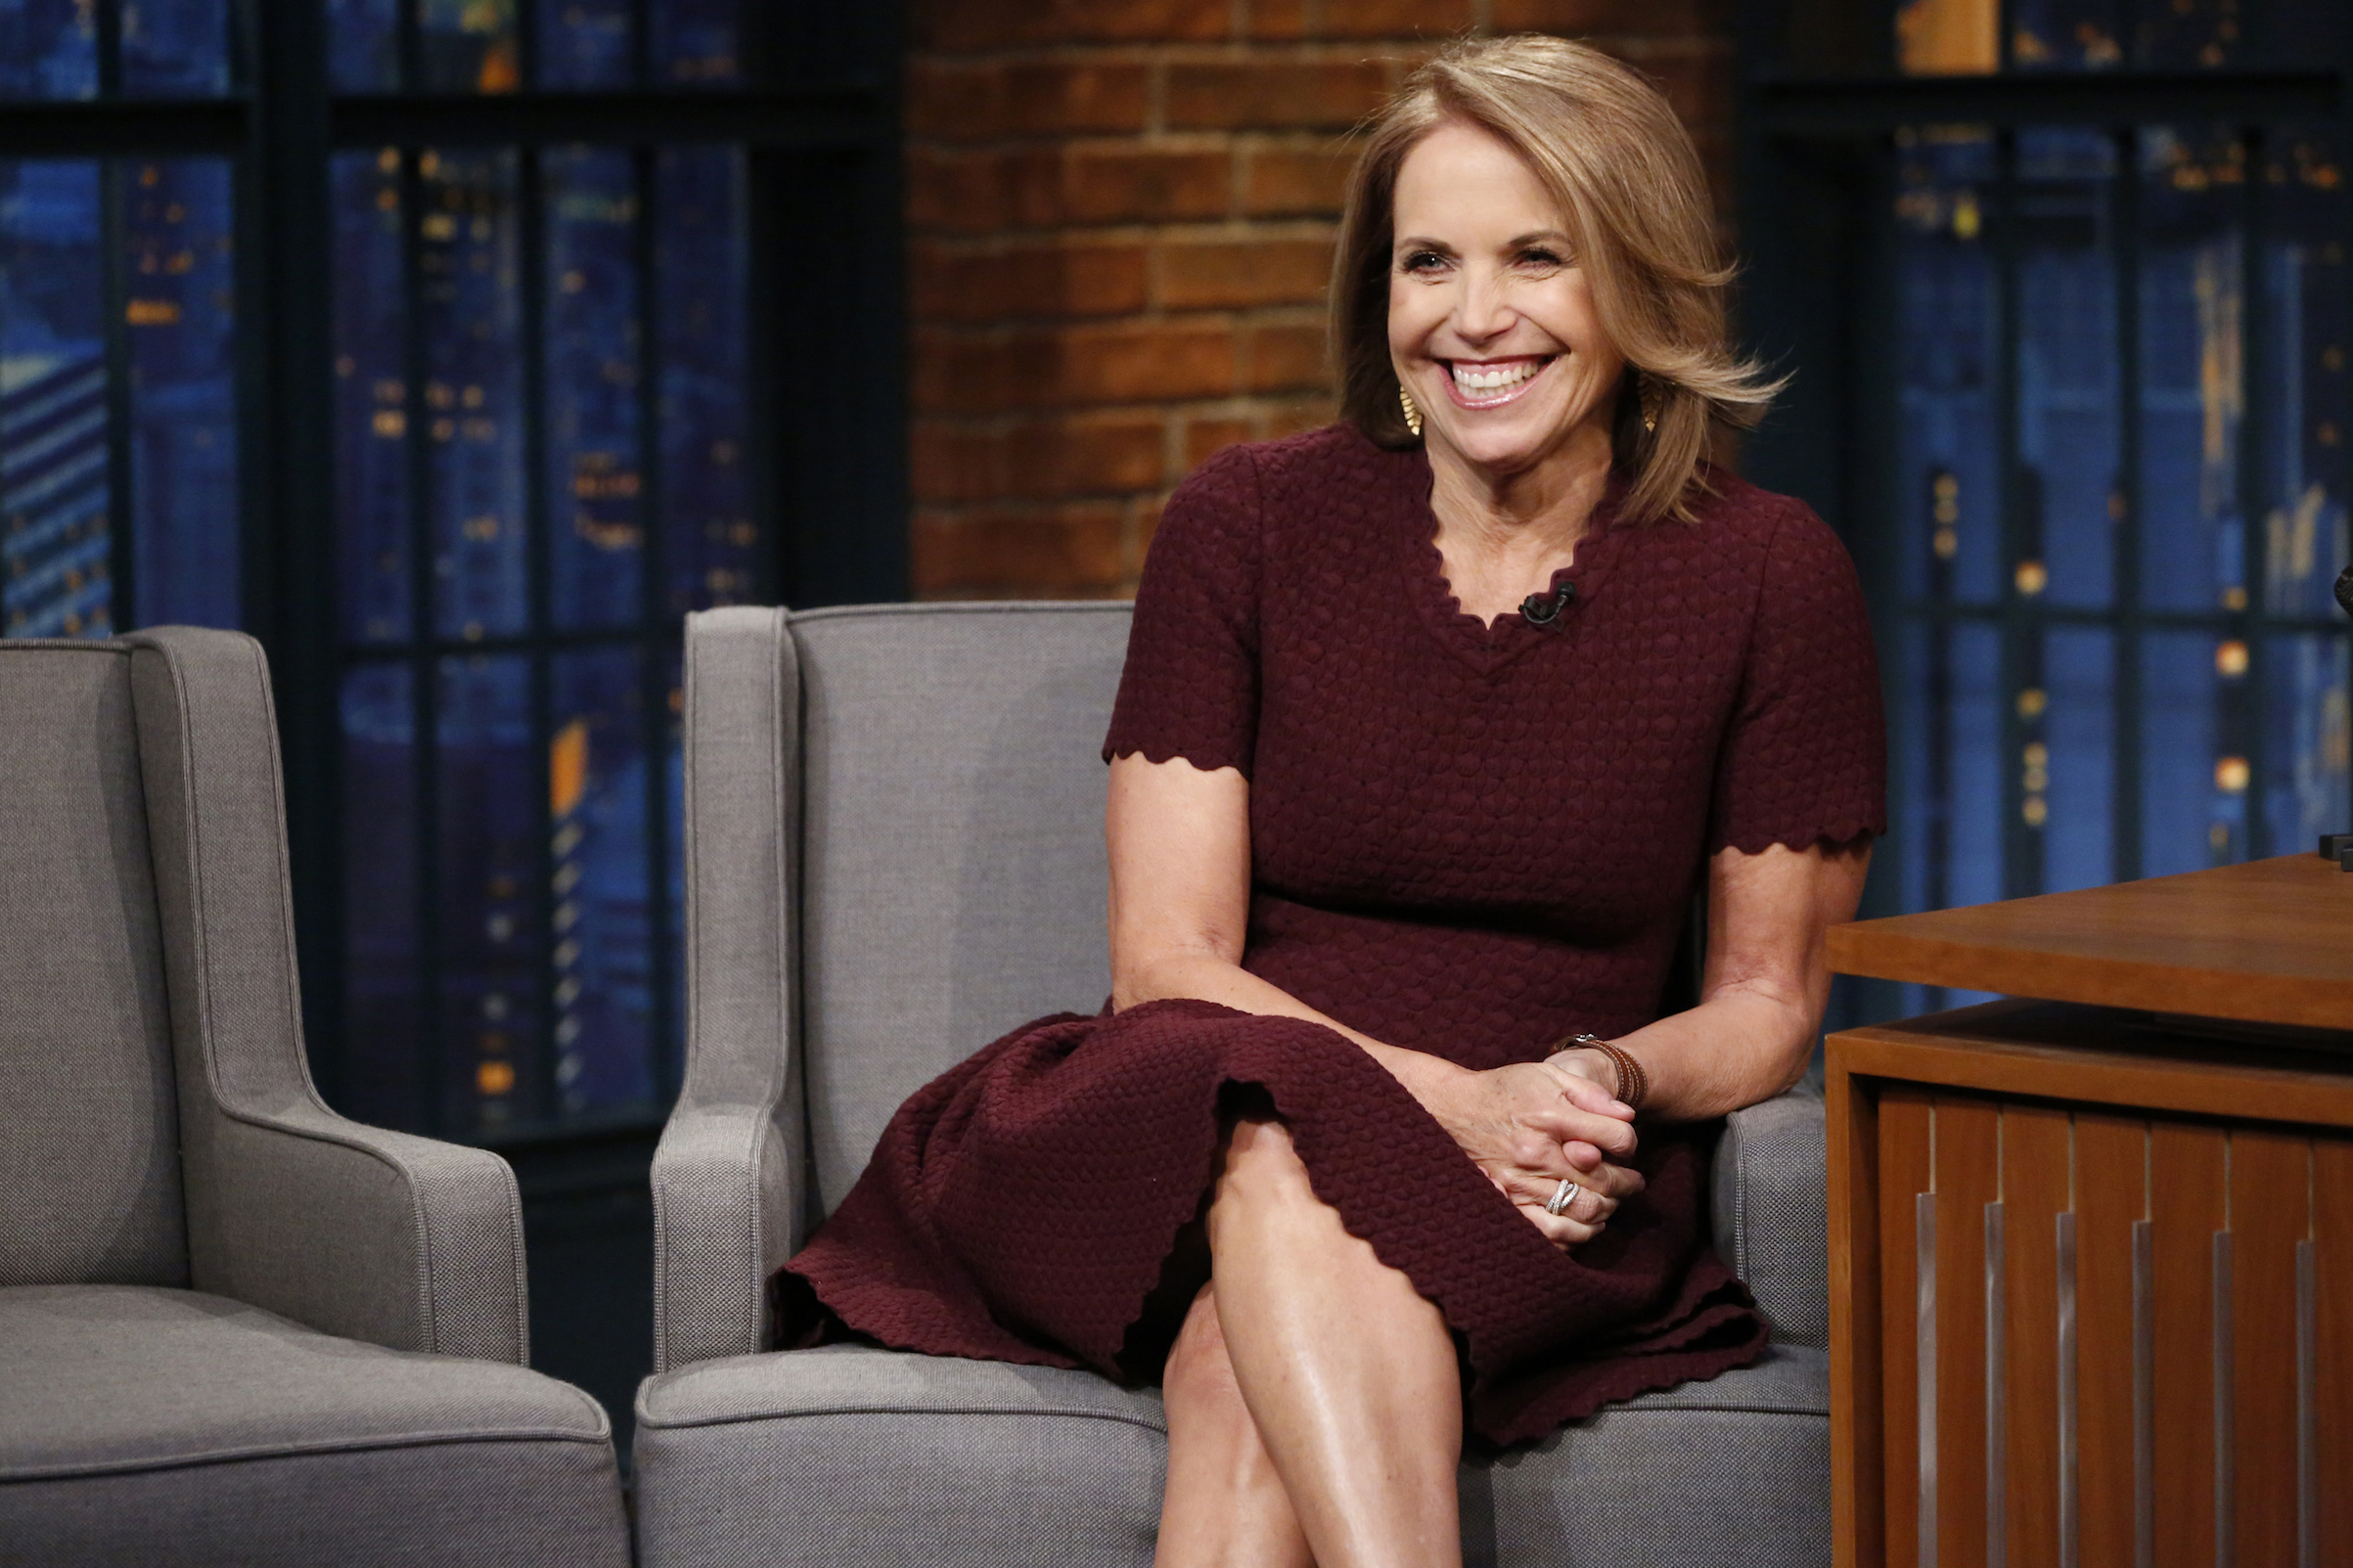 Katie Couric during an interview on "Late Night with Seth Meyers" on Jan. 25, 2017. (Lloyd Bishop&mdash;NBCU Photo Bank/Getty Images)